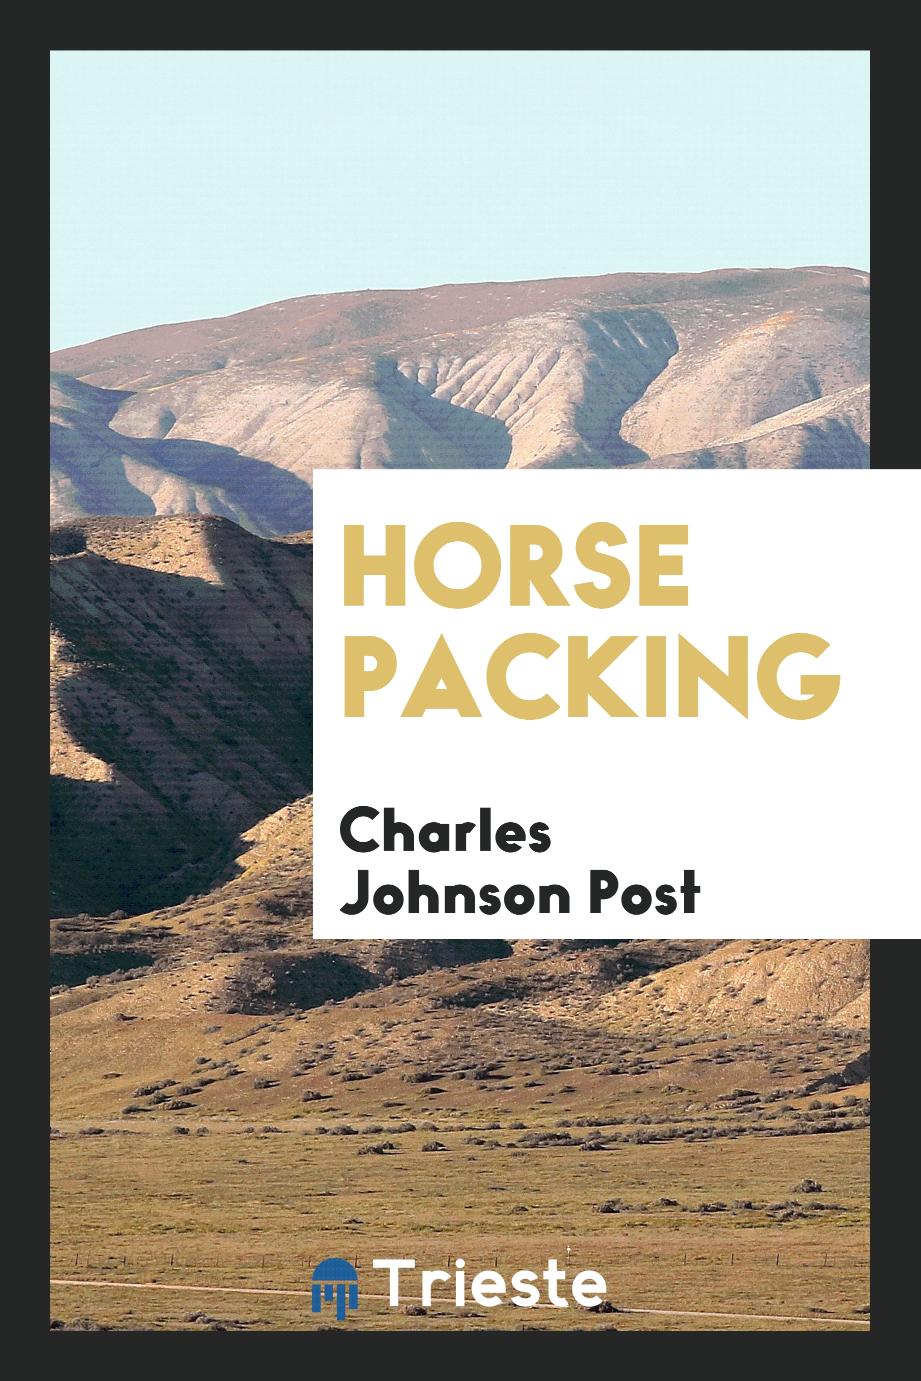 Horse packing